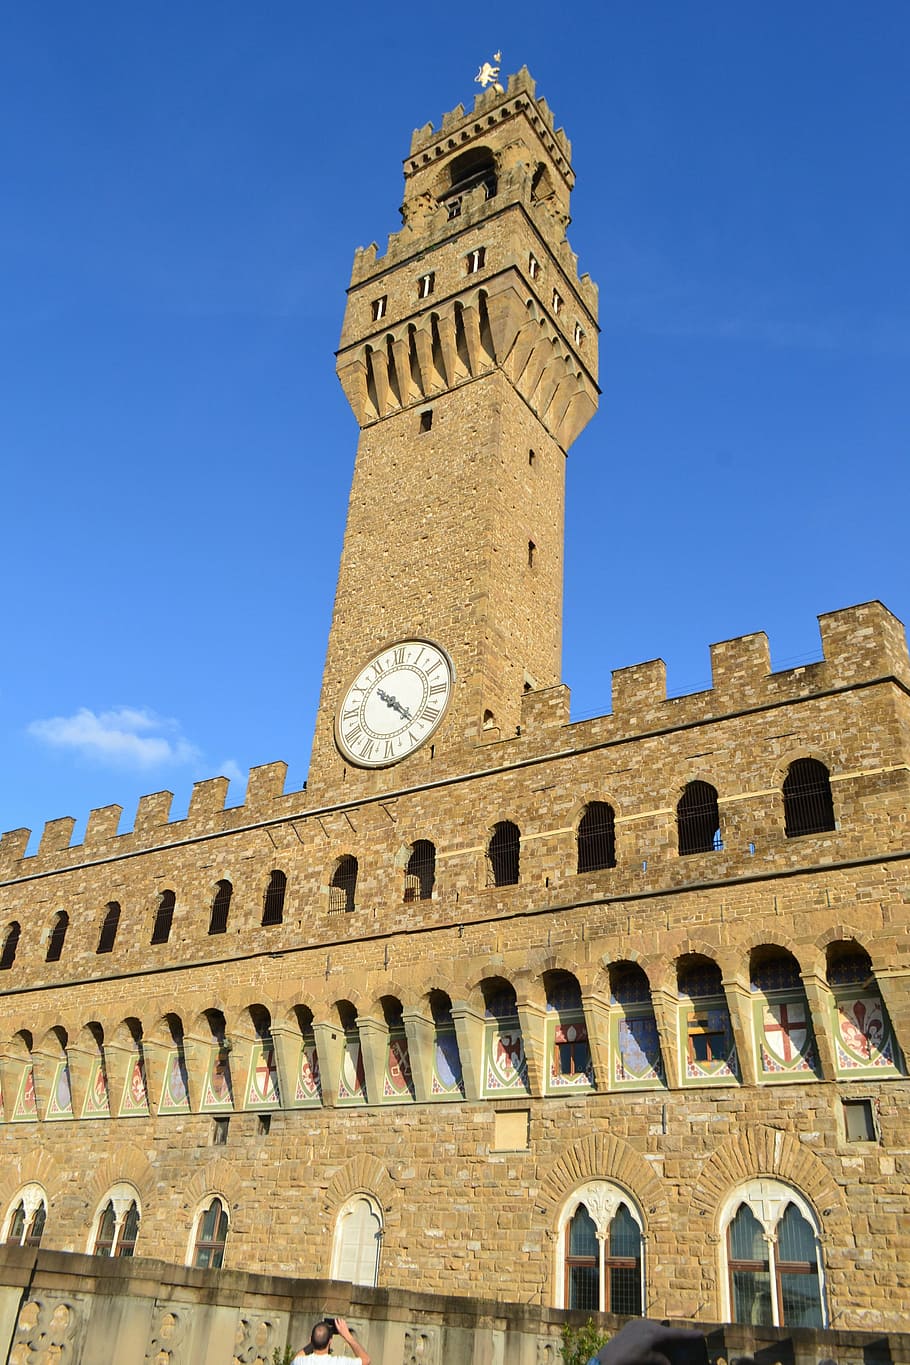 palazzo vecchio, florence, old palace, italy, tower, clock